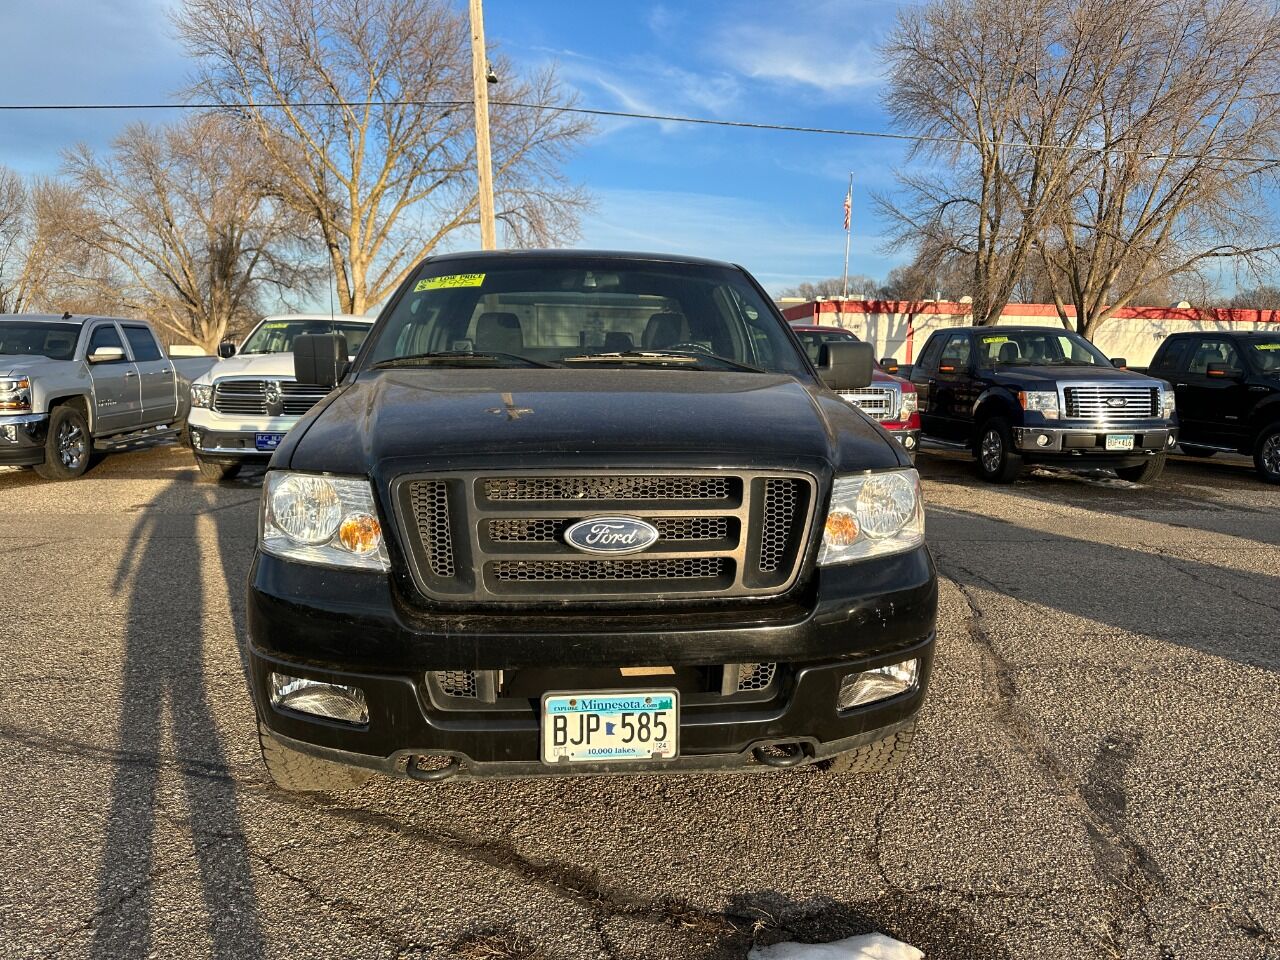 Used 2004 Ford F-150 FX4 with VIN 1FTPX14534NC53957 for sale in Faribault, Minnesota